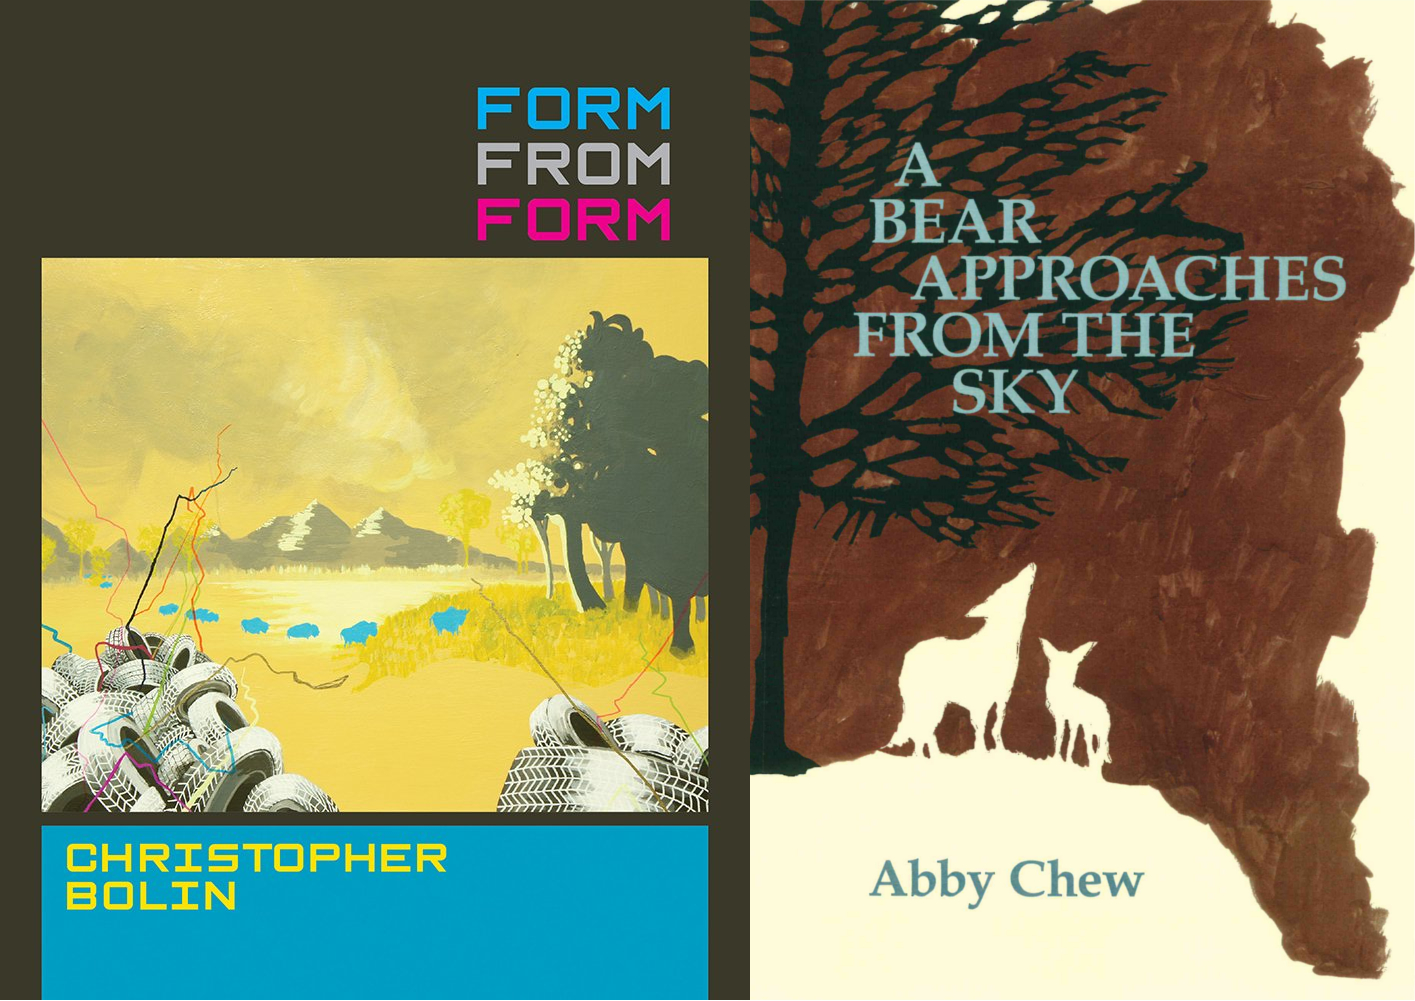 Book covers, Form from Form and A Bear Approaches from the Sky